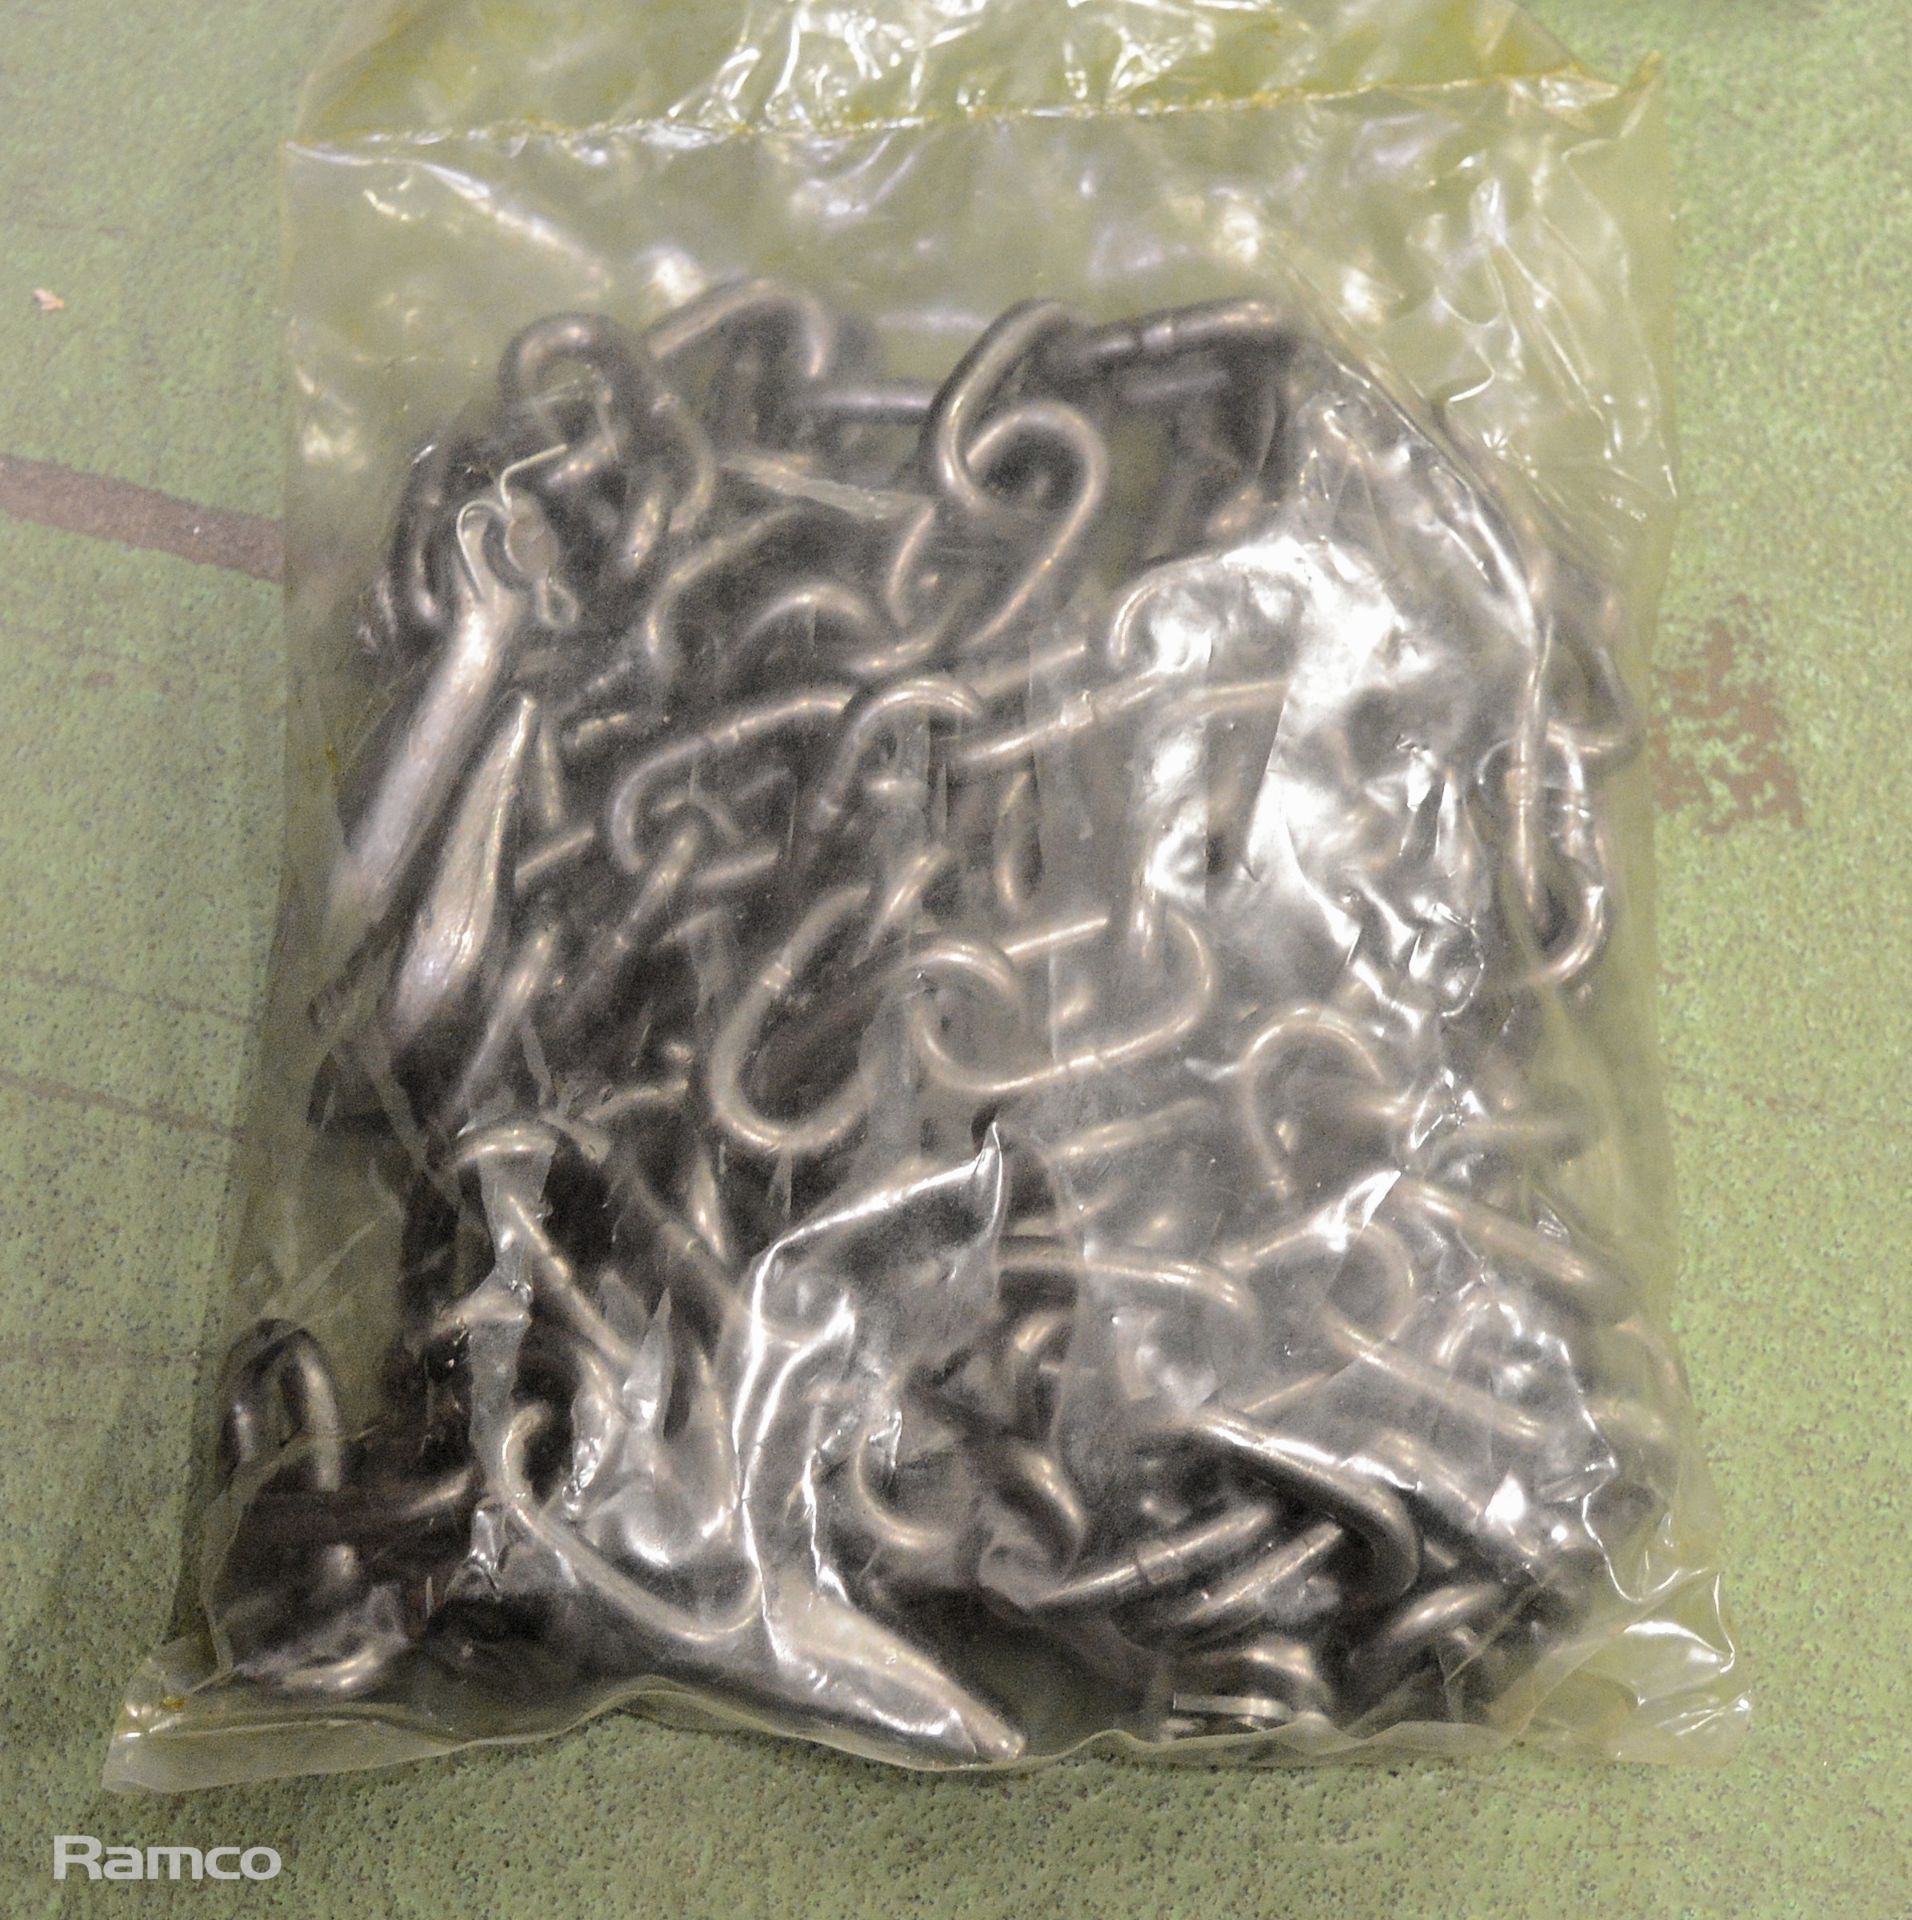 Marksman 14ft Heavy Duty Utility Chain with 5/16in Hooks - Image 3 of 3